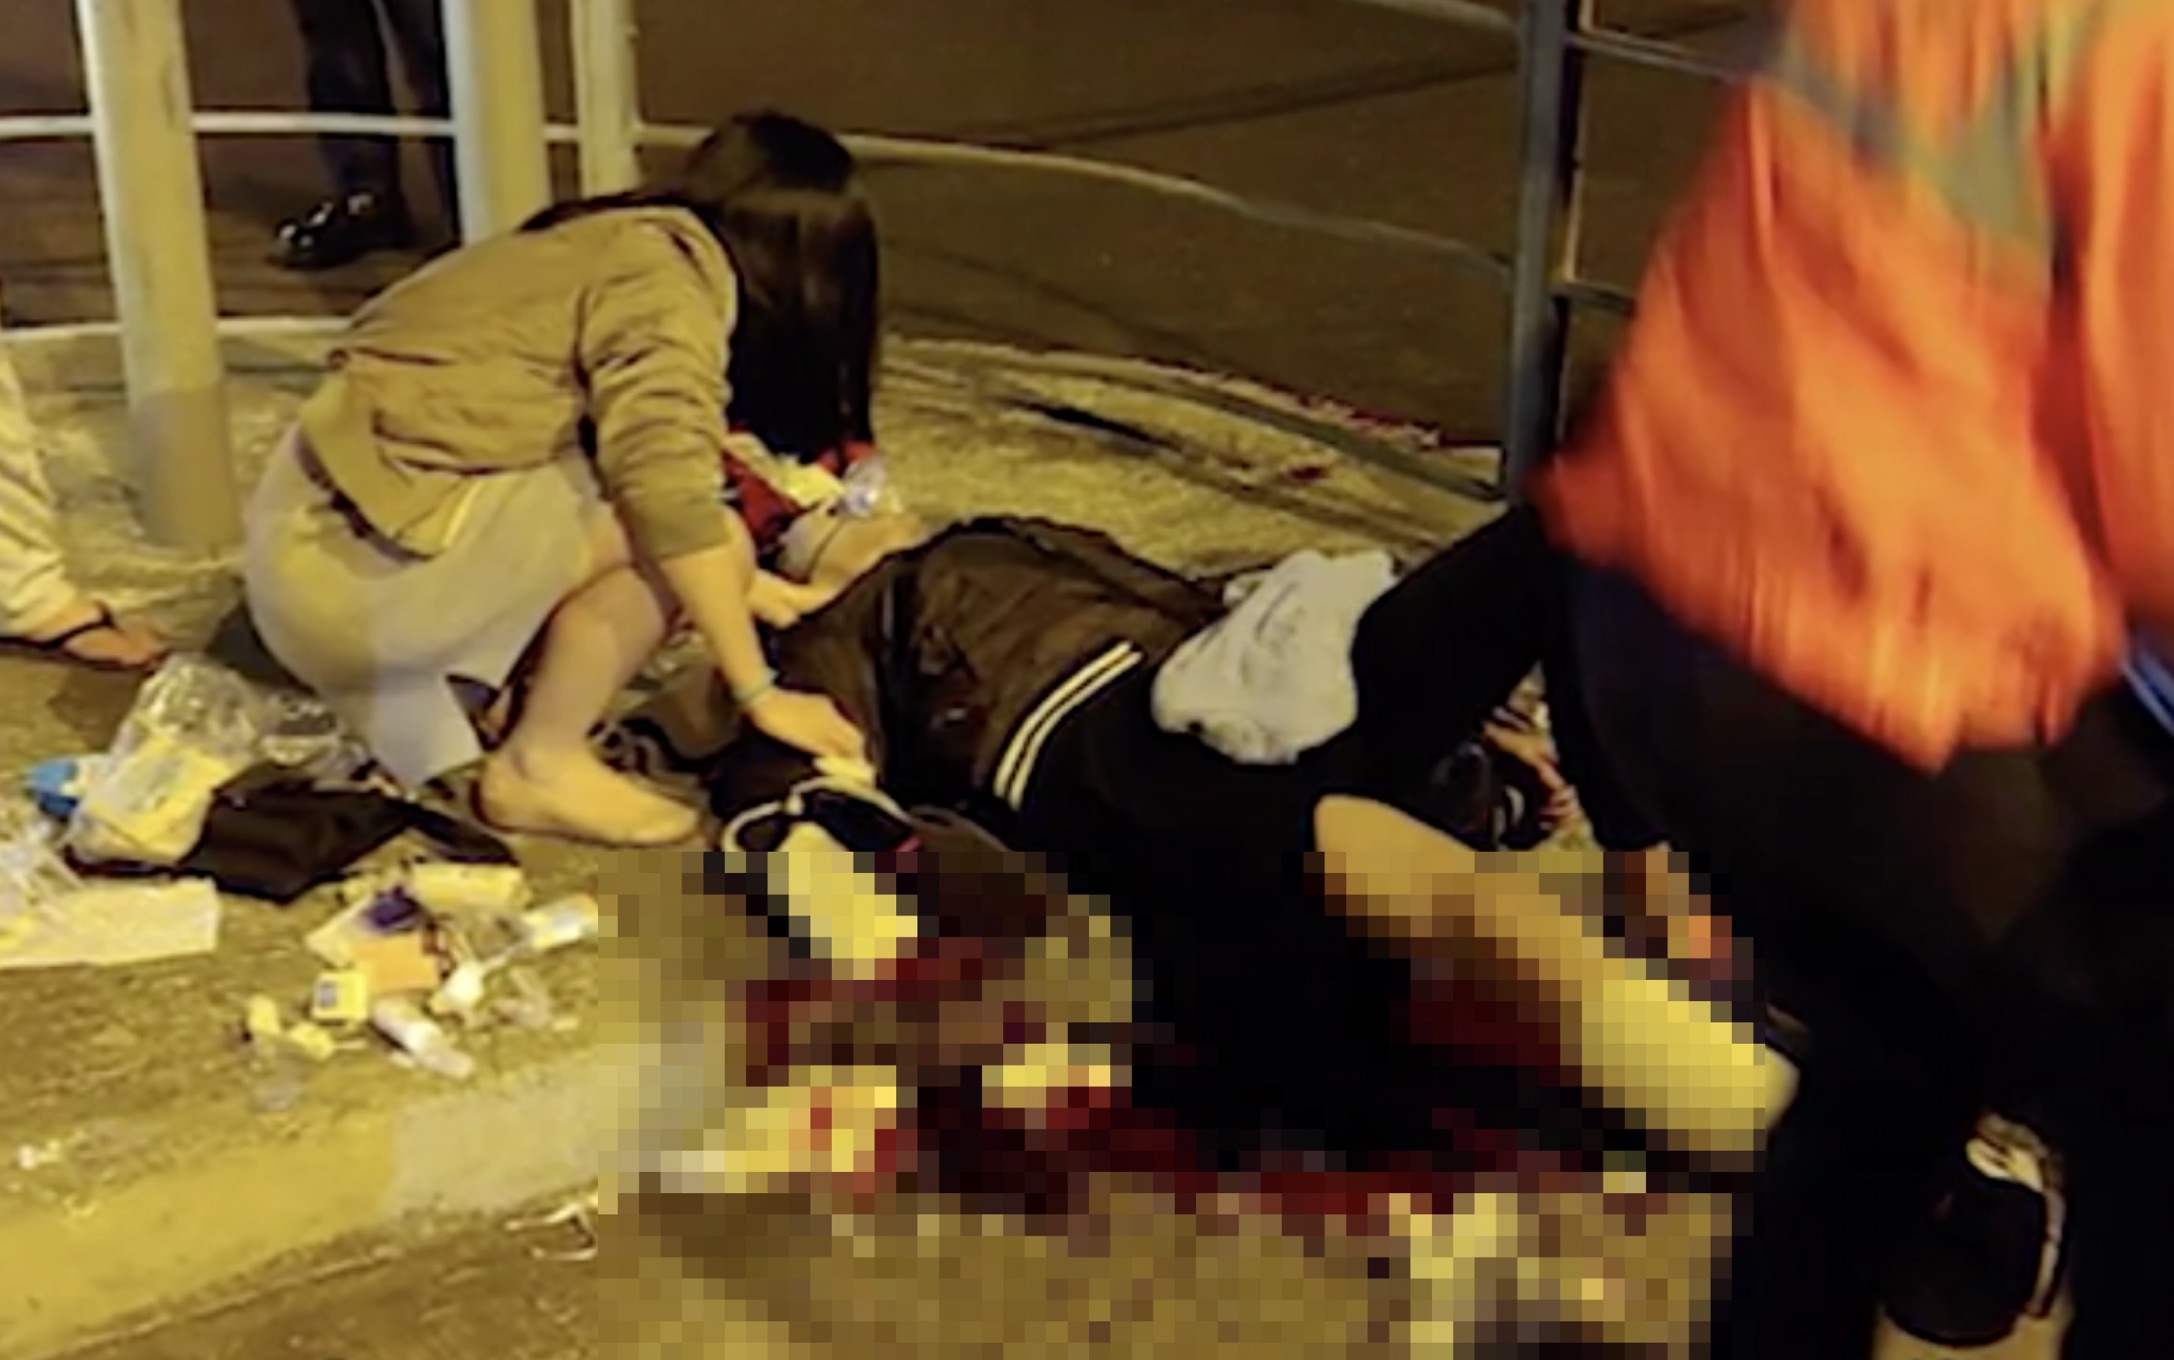 District councillor and doctor Kwong Po-yin tending to a 23-year-old man who was attacked by two knife-wielding men. Screengrab via Apple Daily video.